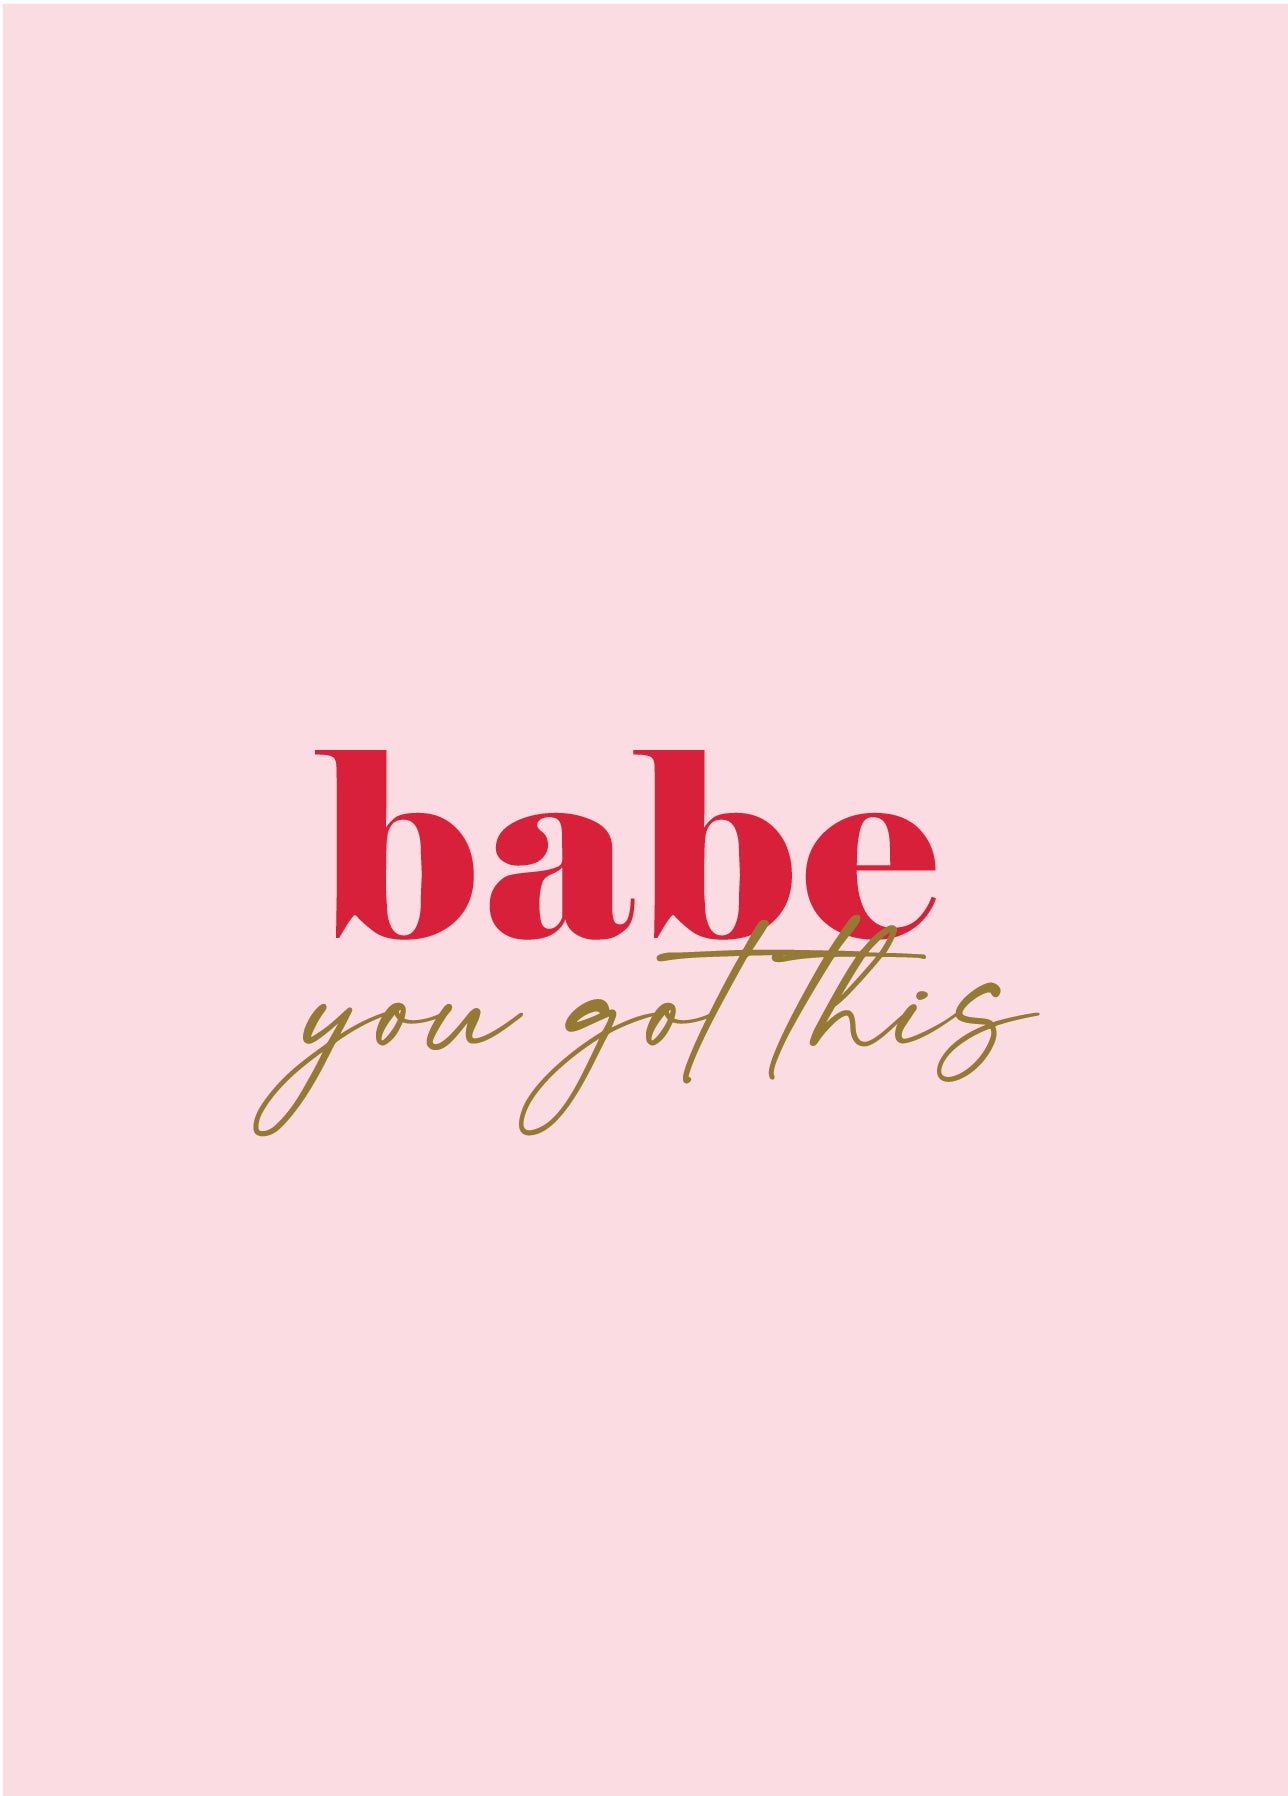 babe you got this